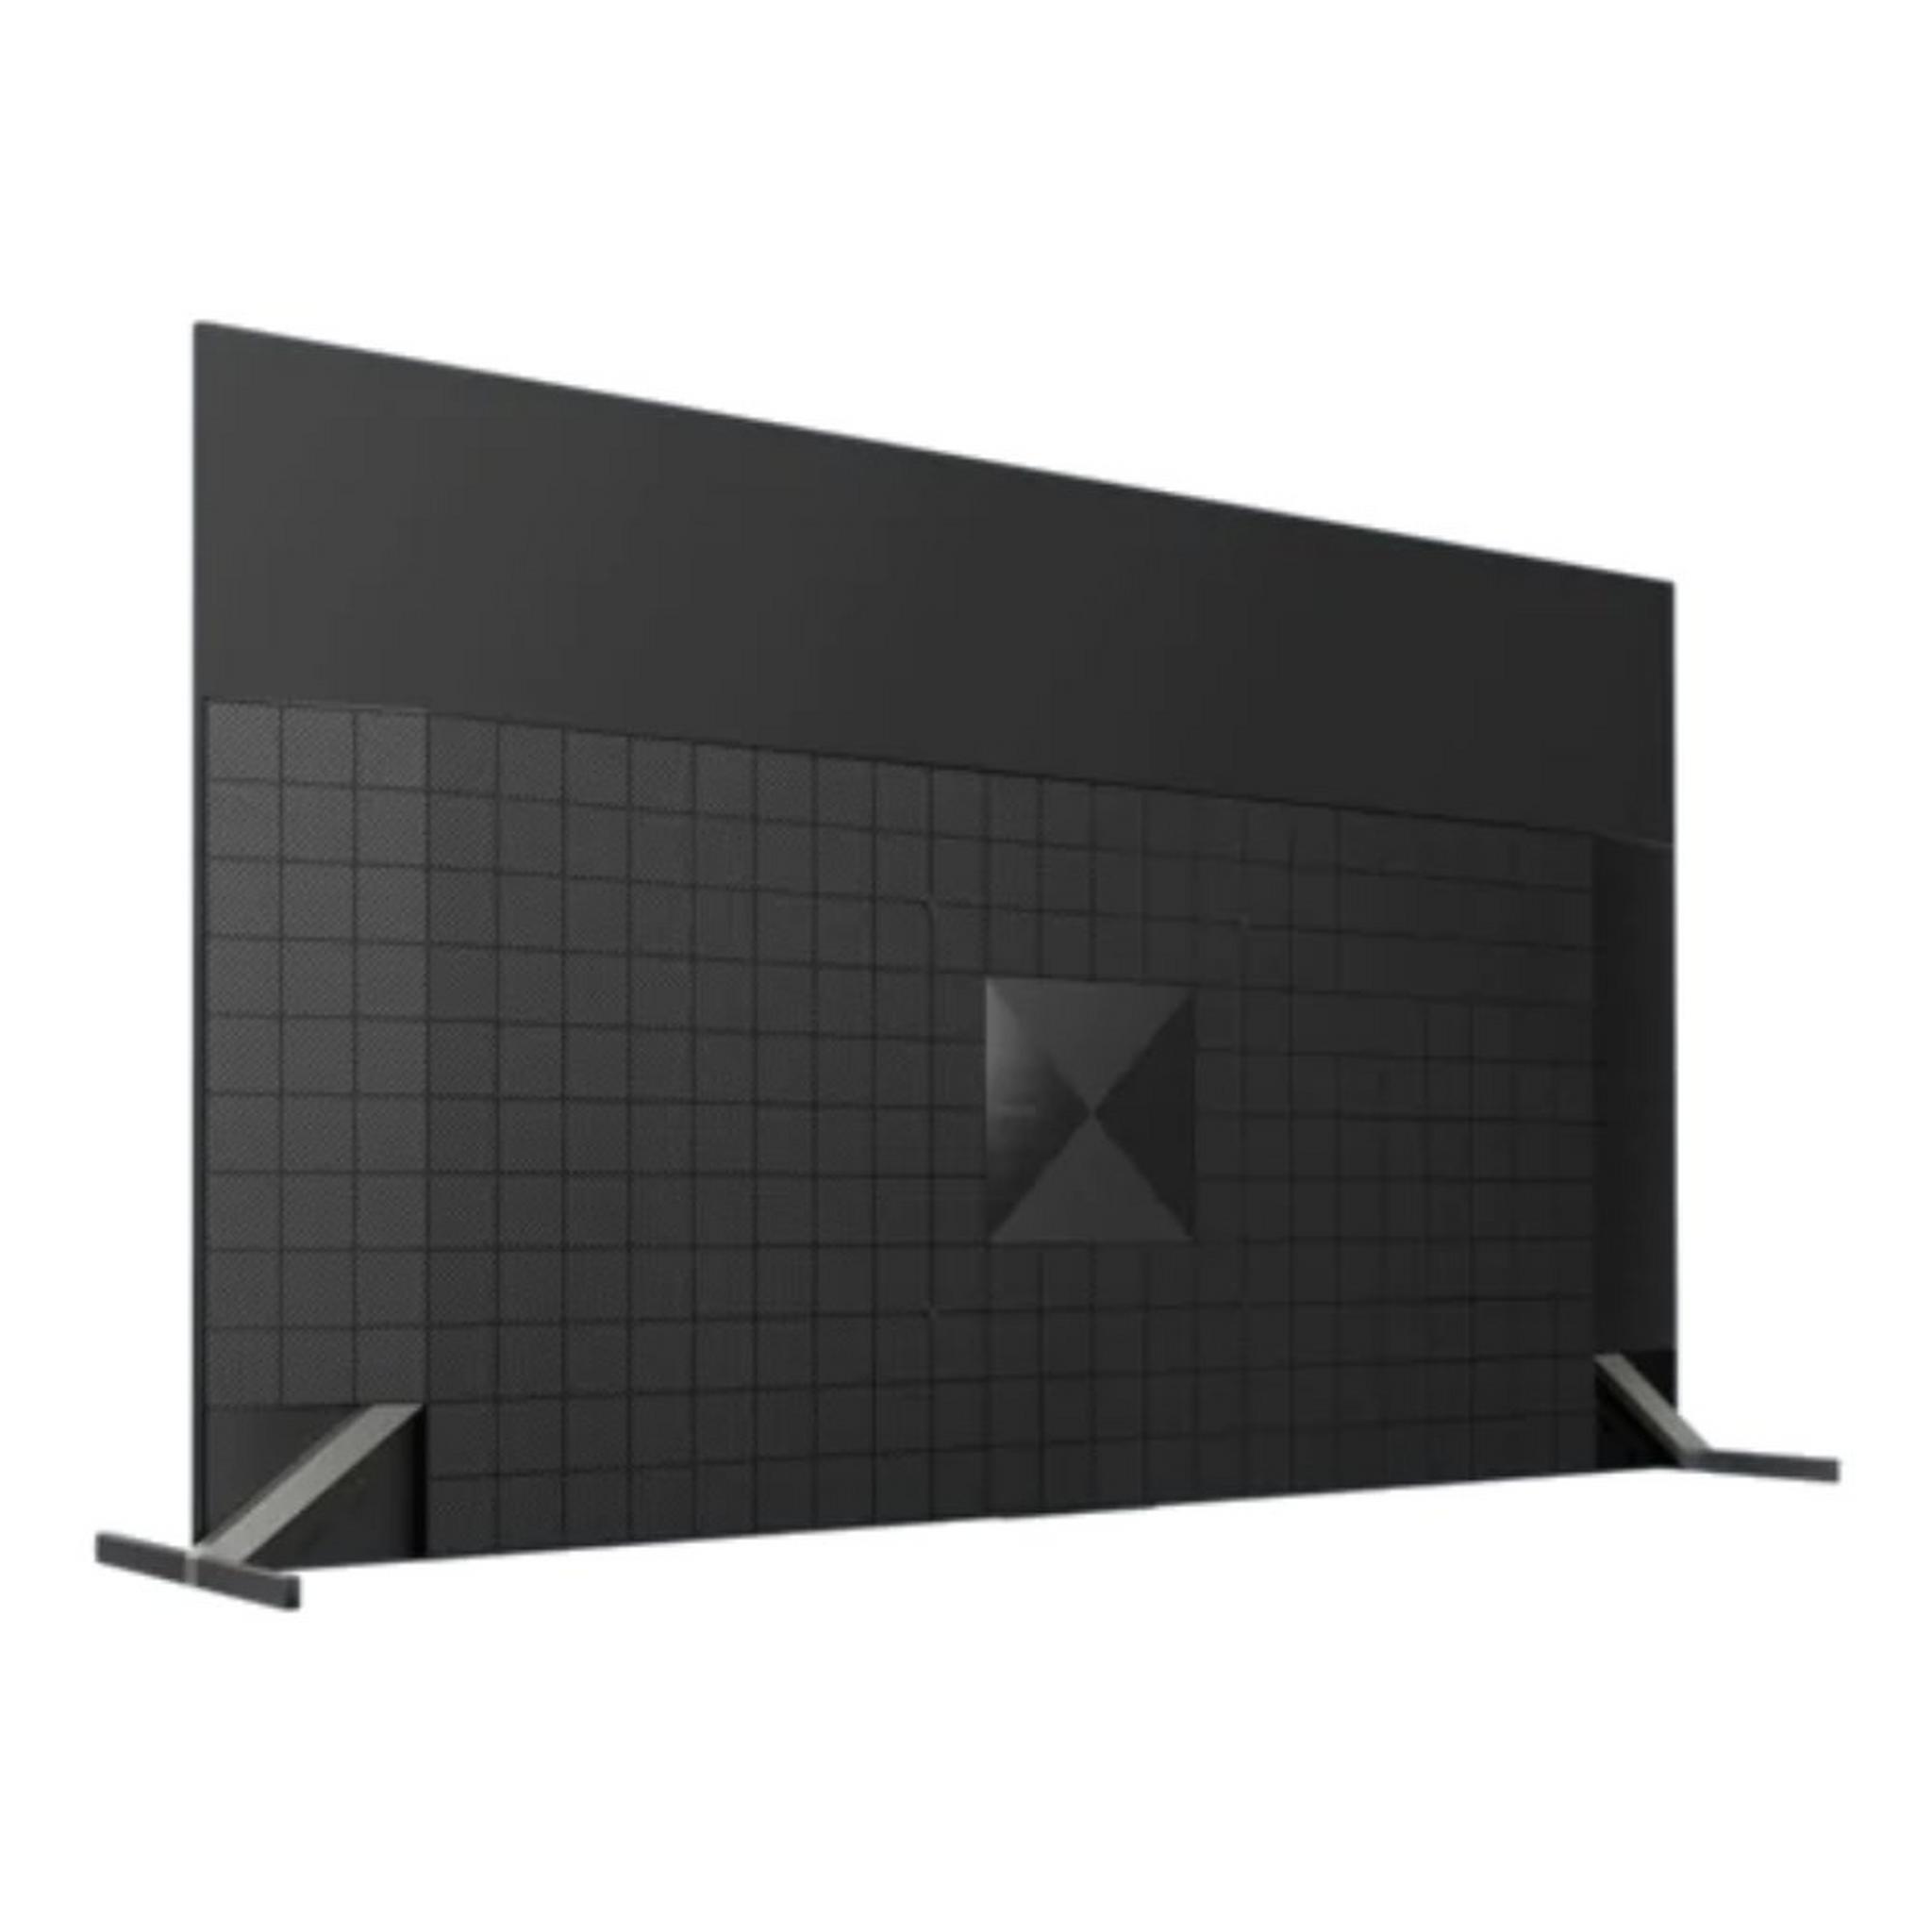 Sony Series A90J 83-inch OLED 4K Android TV (XR-83A90J)